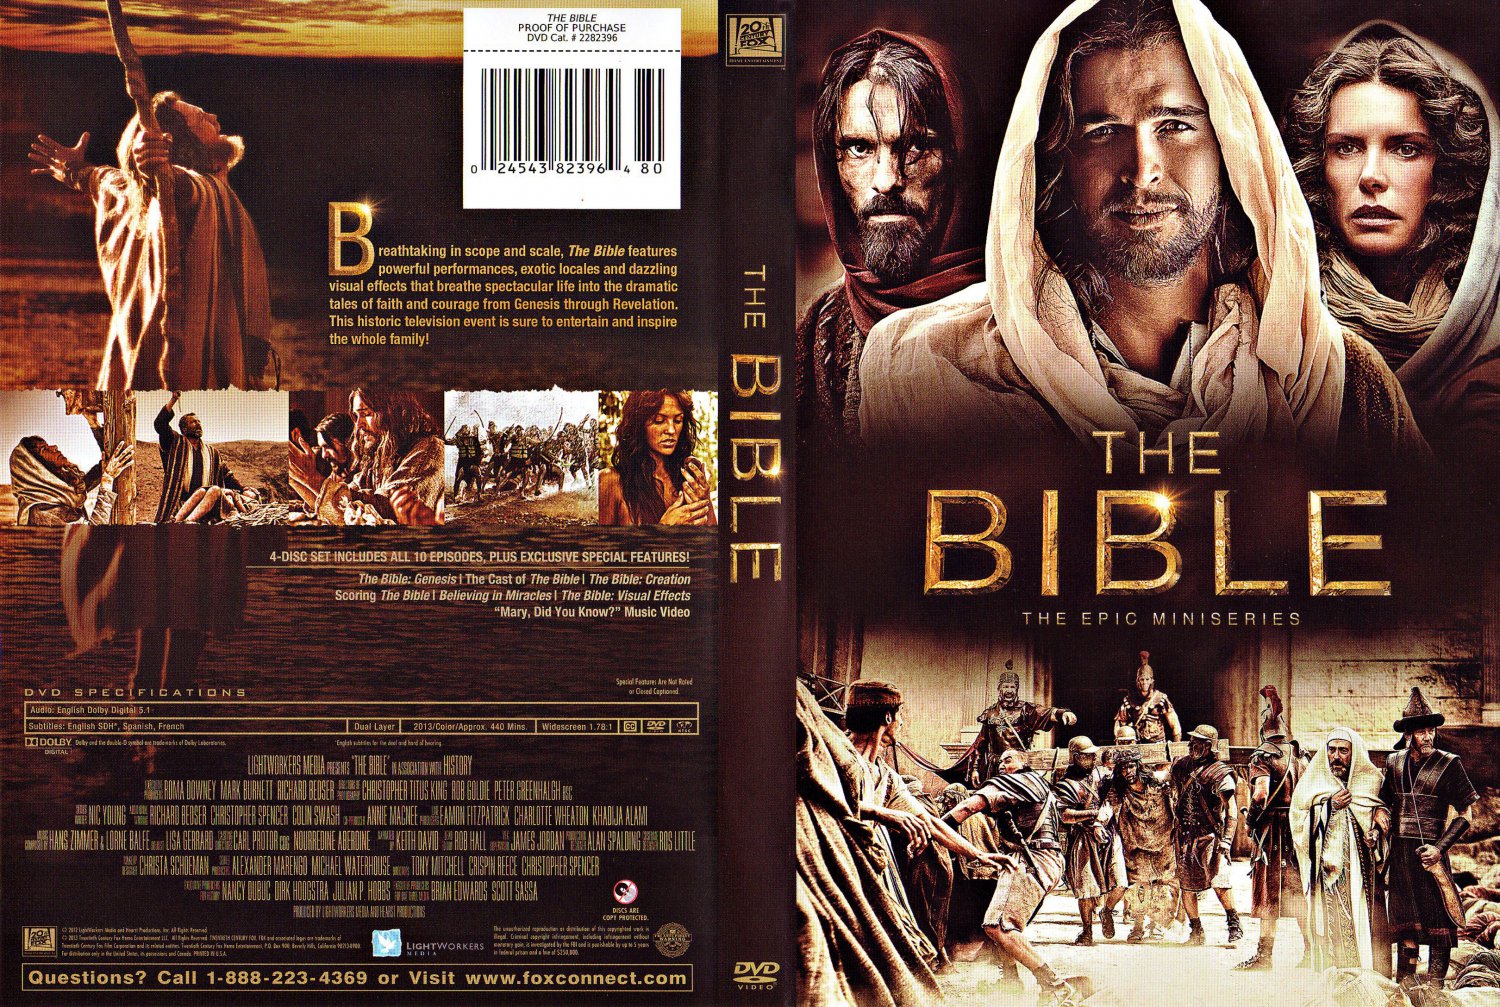 the bible experience free download torrent